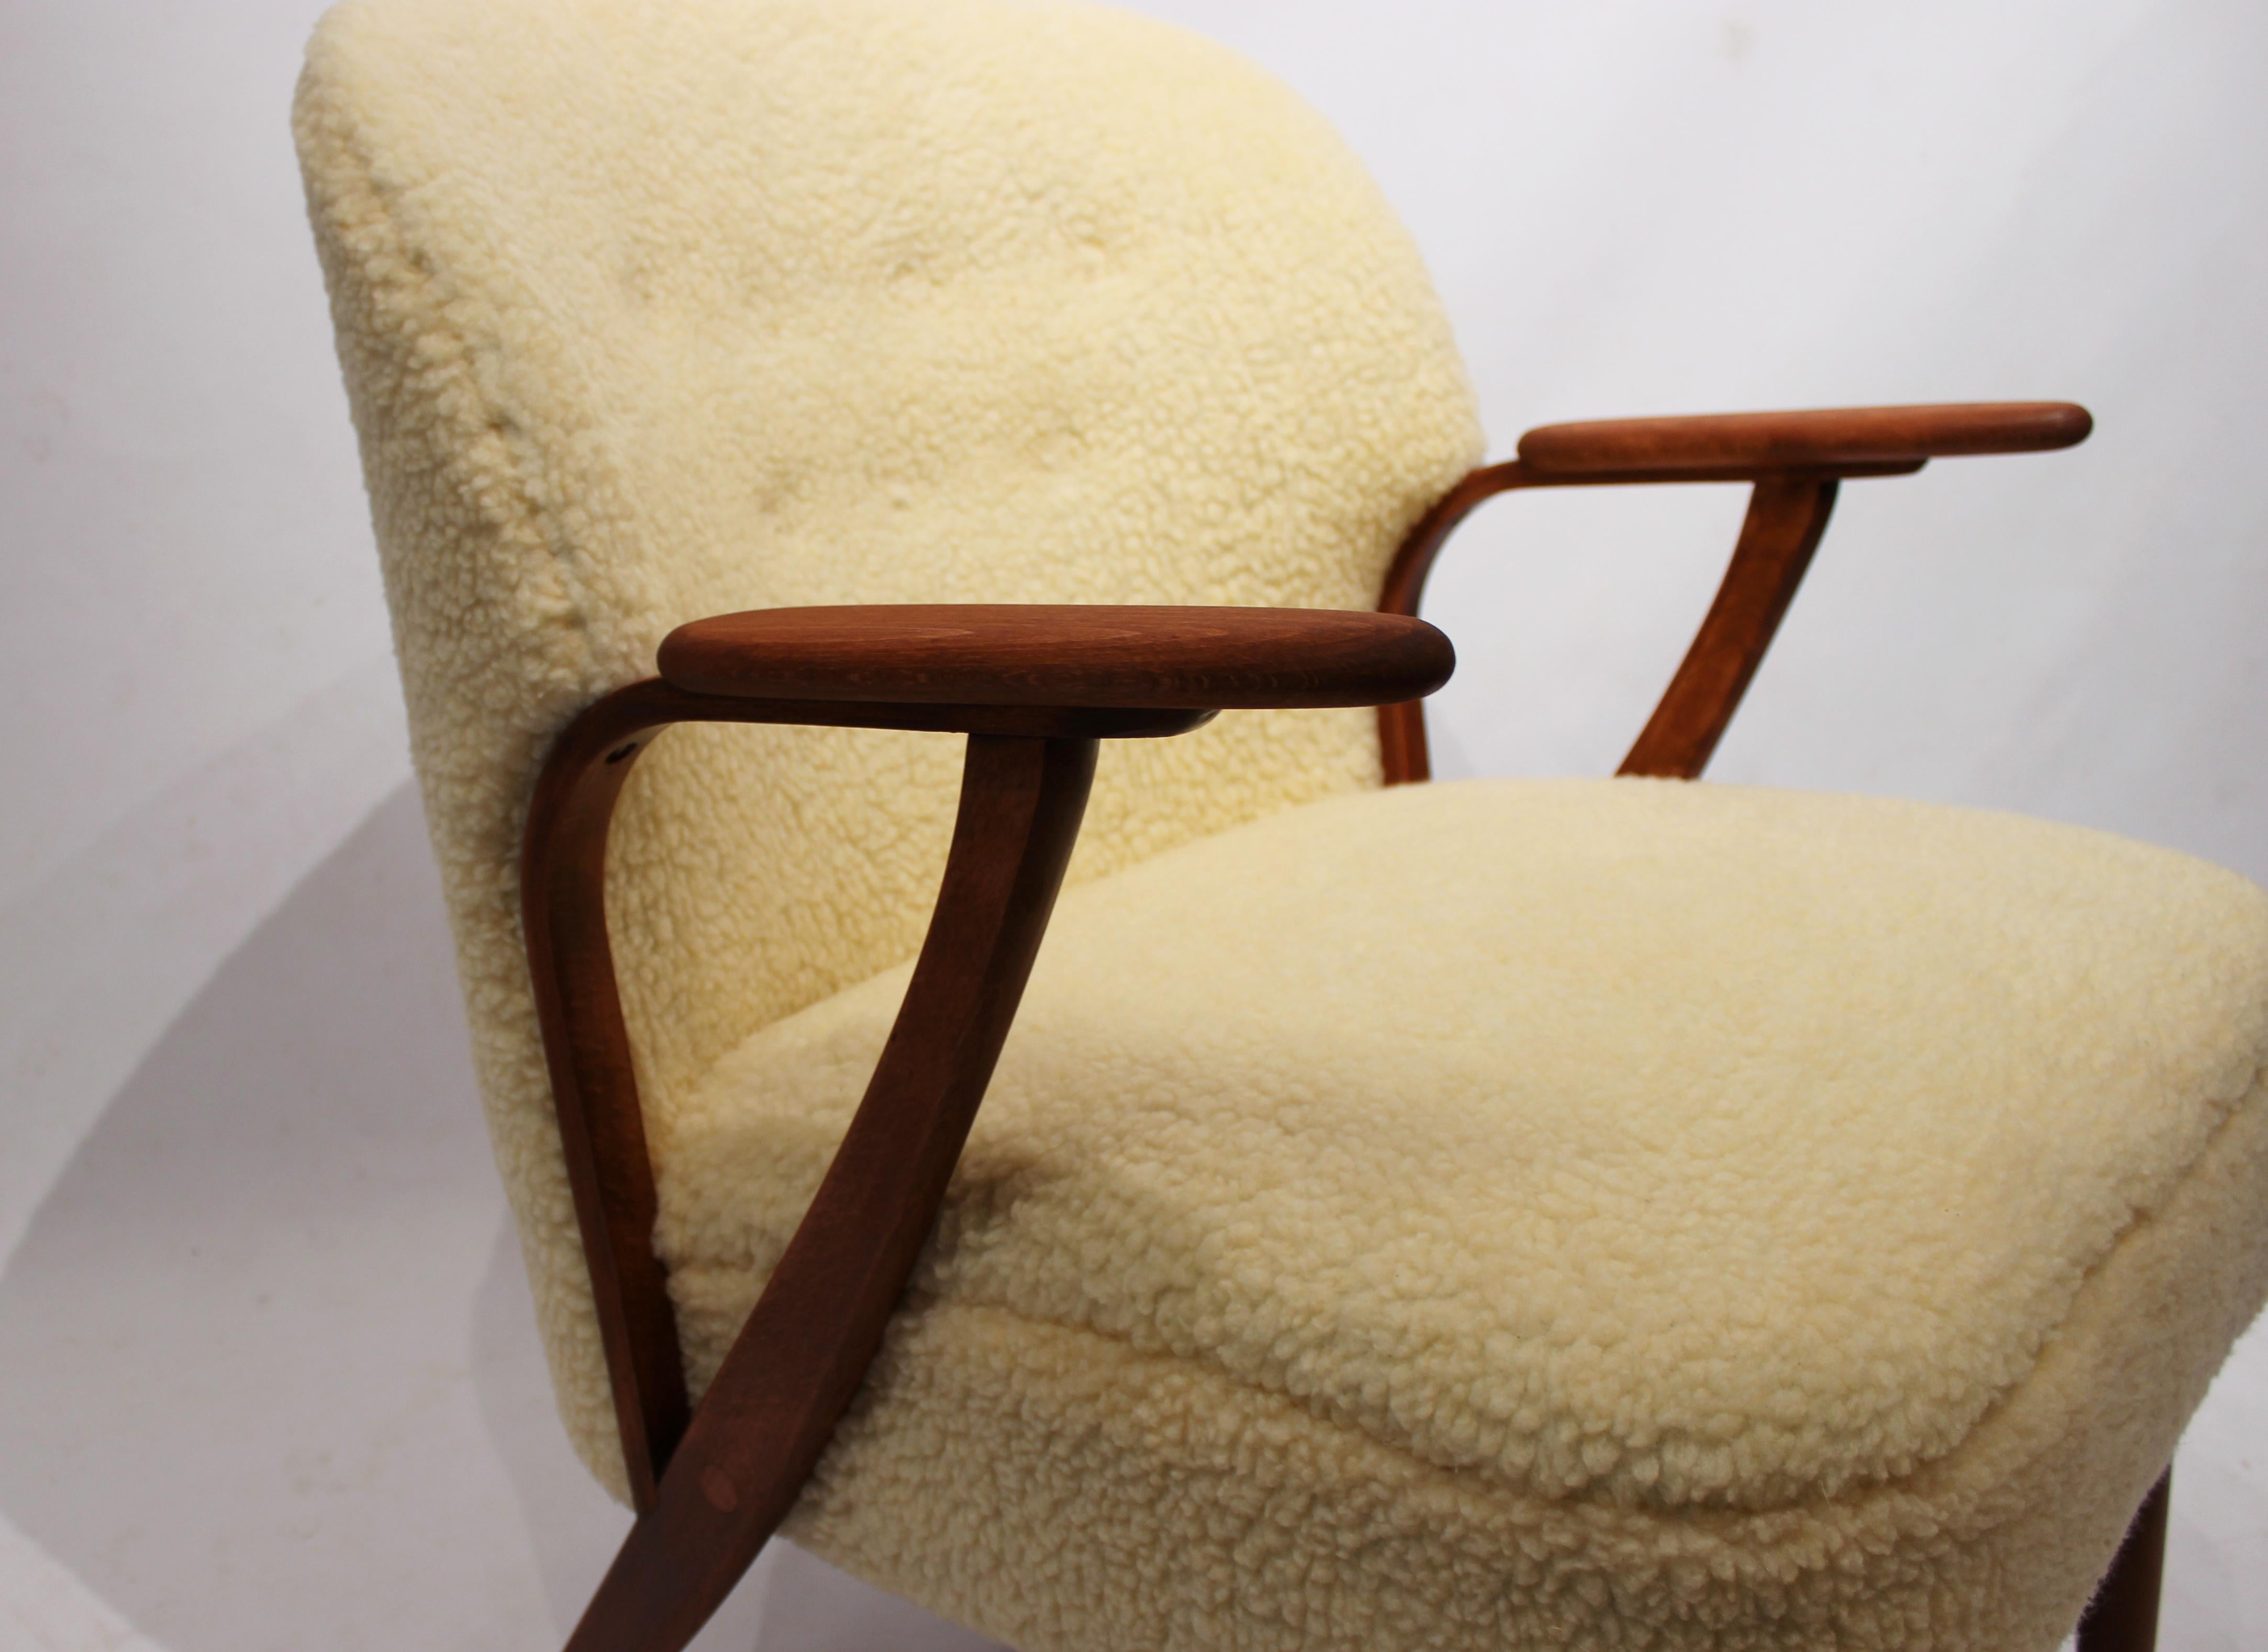 Easy Chair Upholstered in Sheep Wool, Danish Design, 1960s (Wolle)